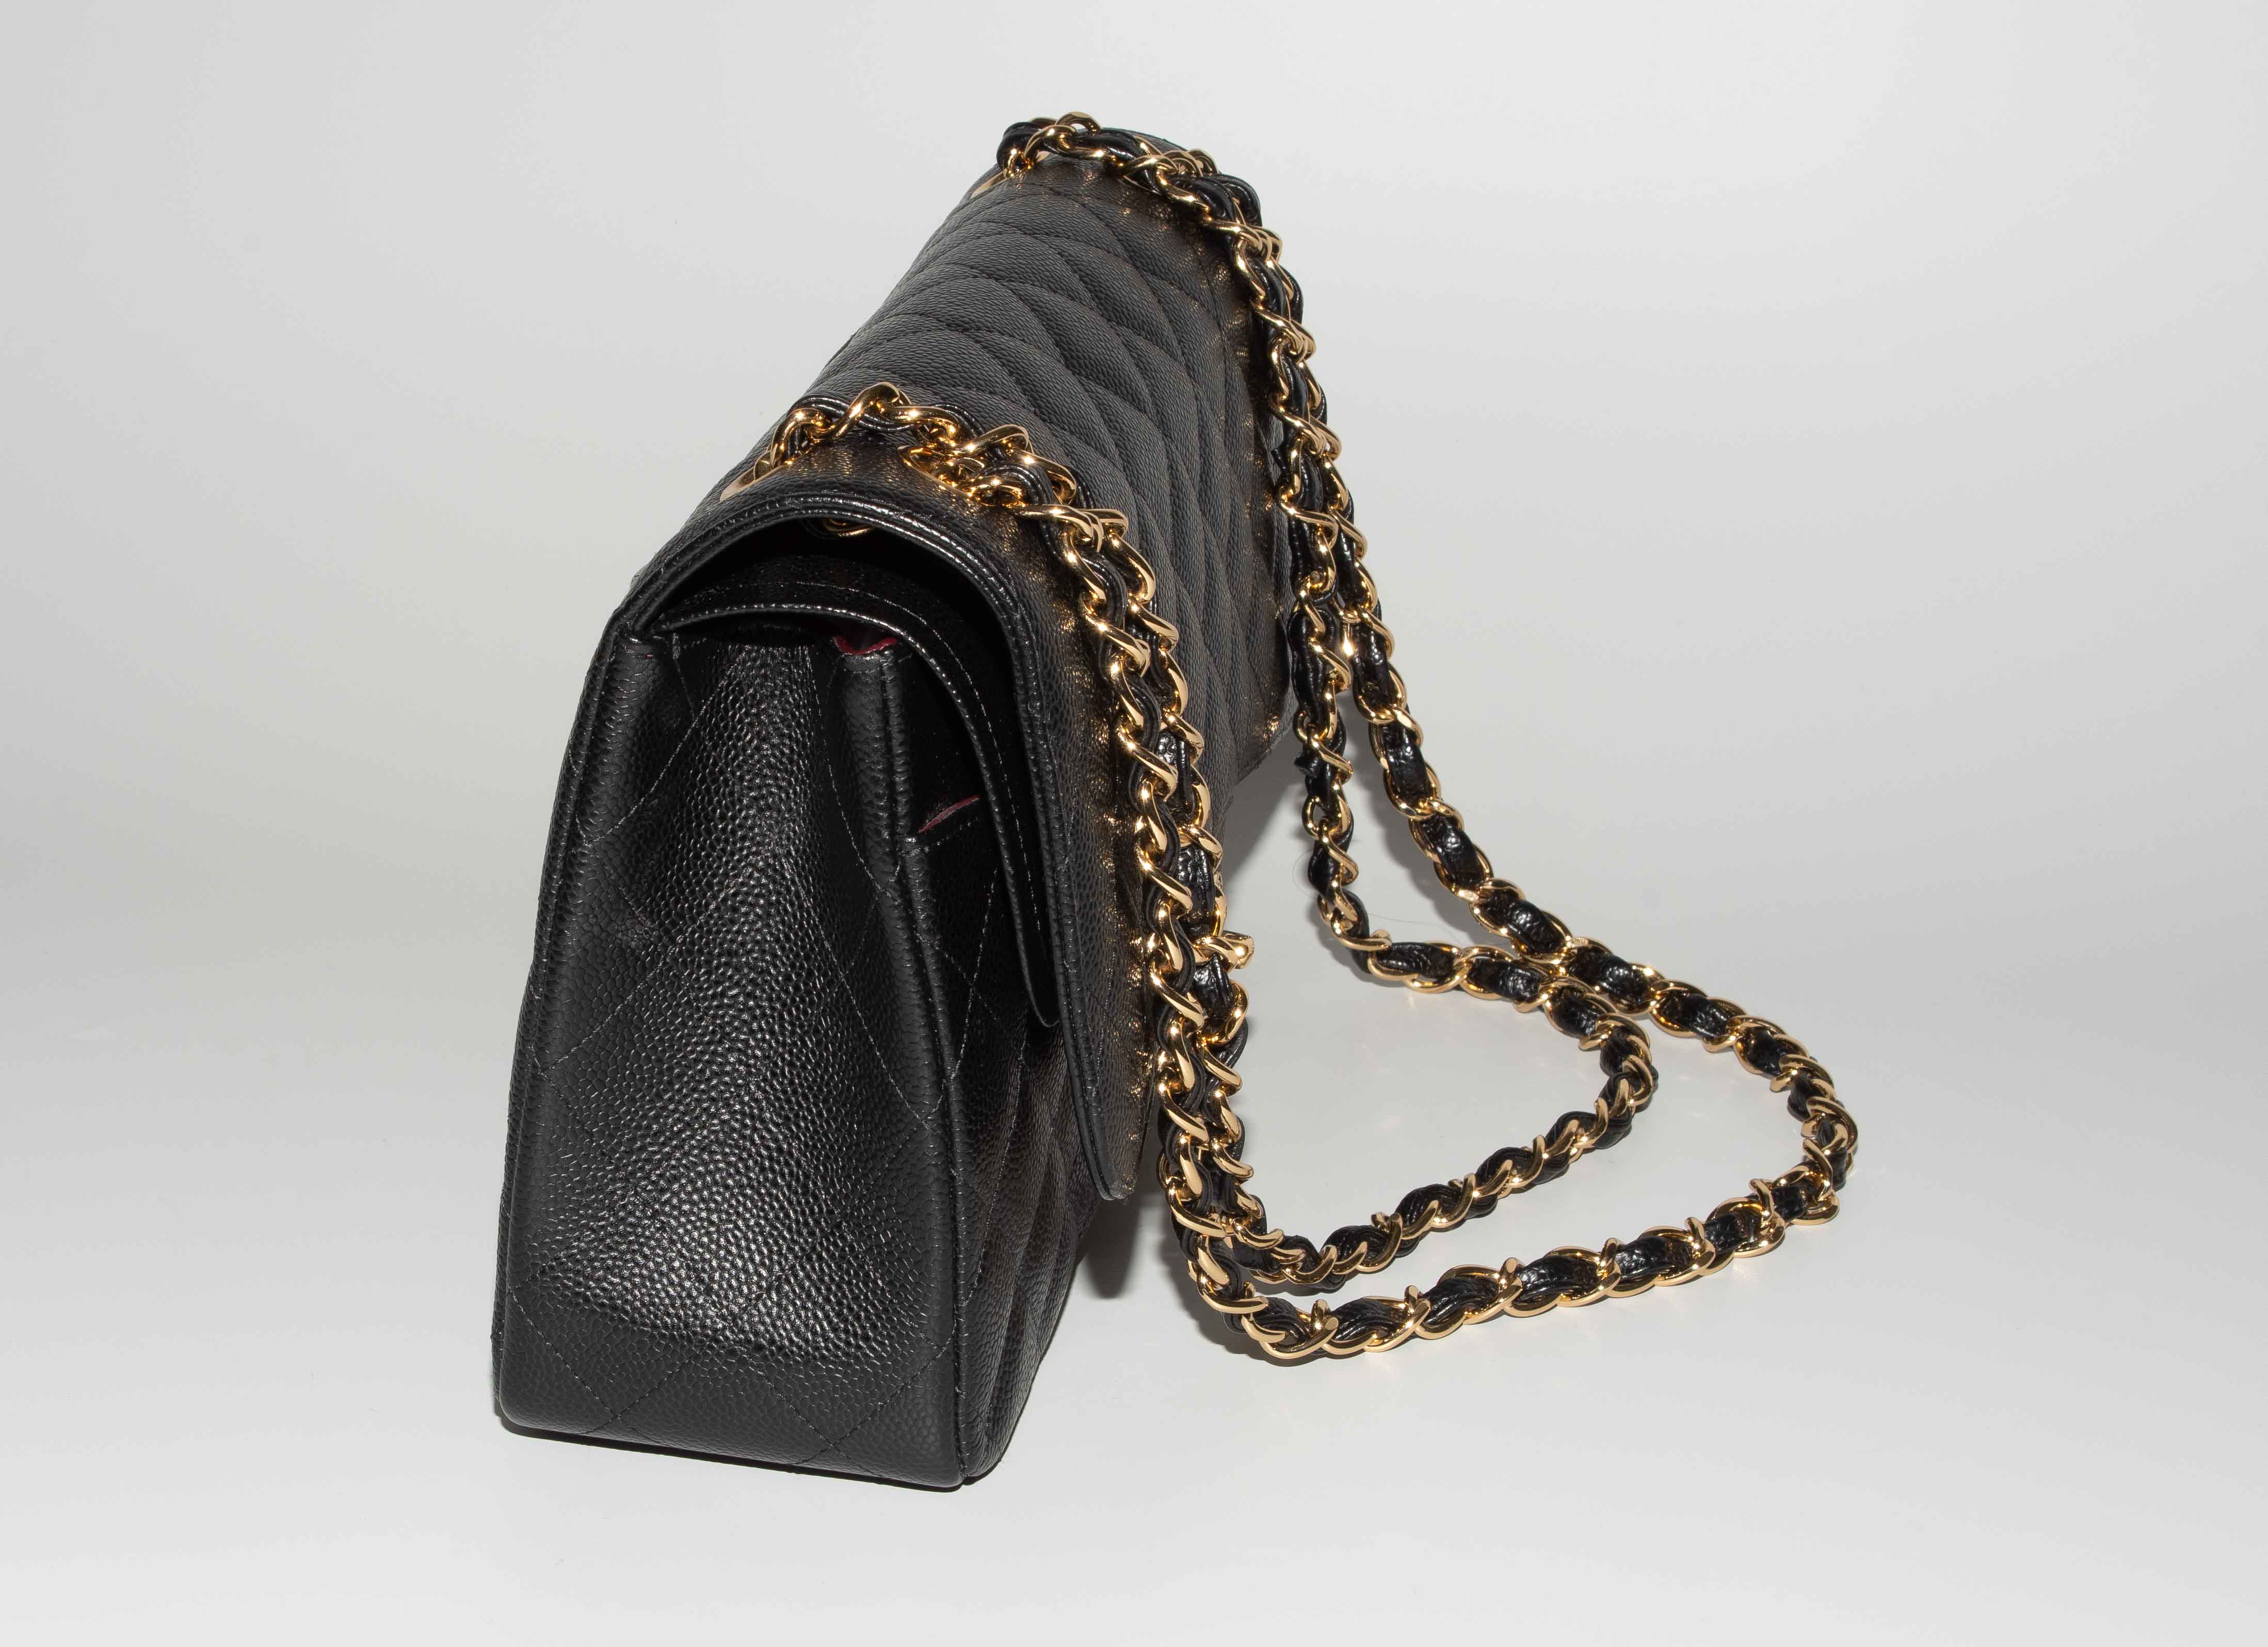 Chanel, Tasche "Timeless" - Image 5 of 16